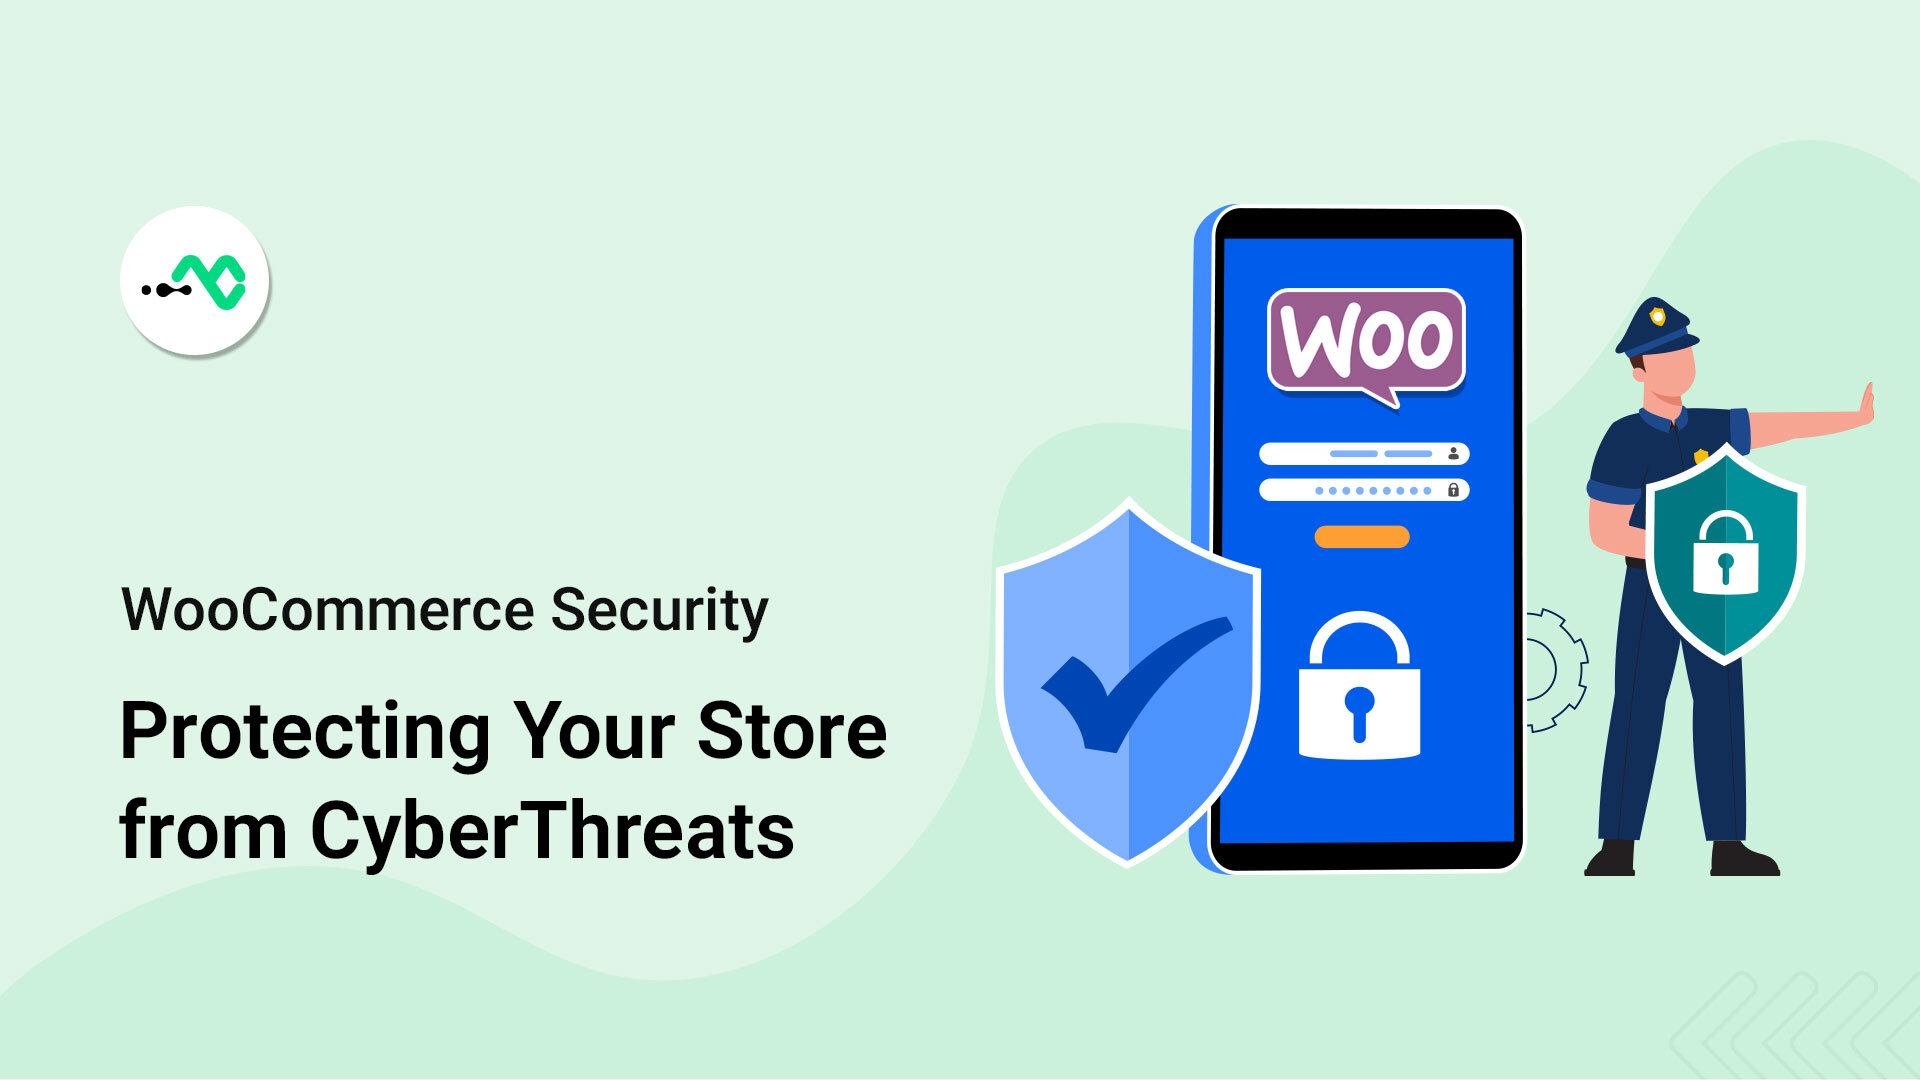 WooCommerce Security: Protecting Your Store from Cyber Threats